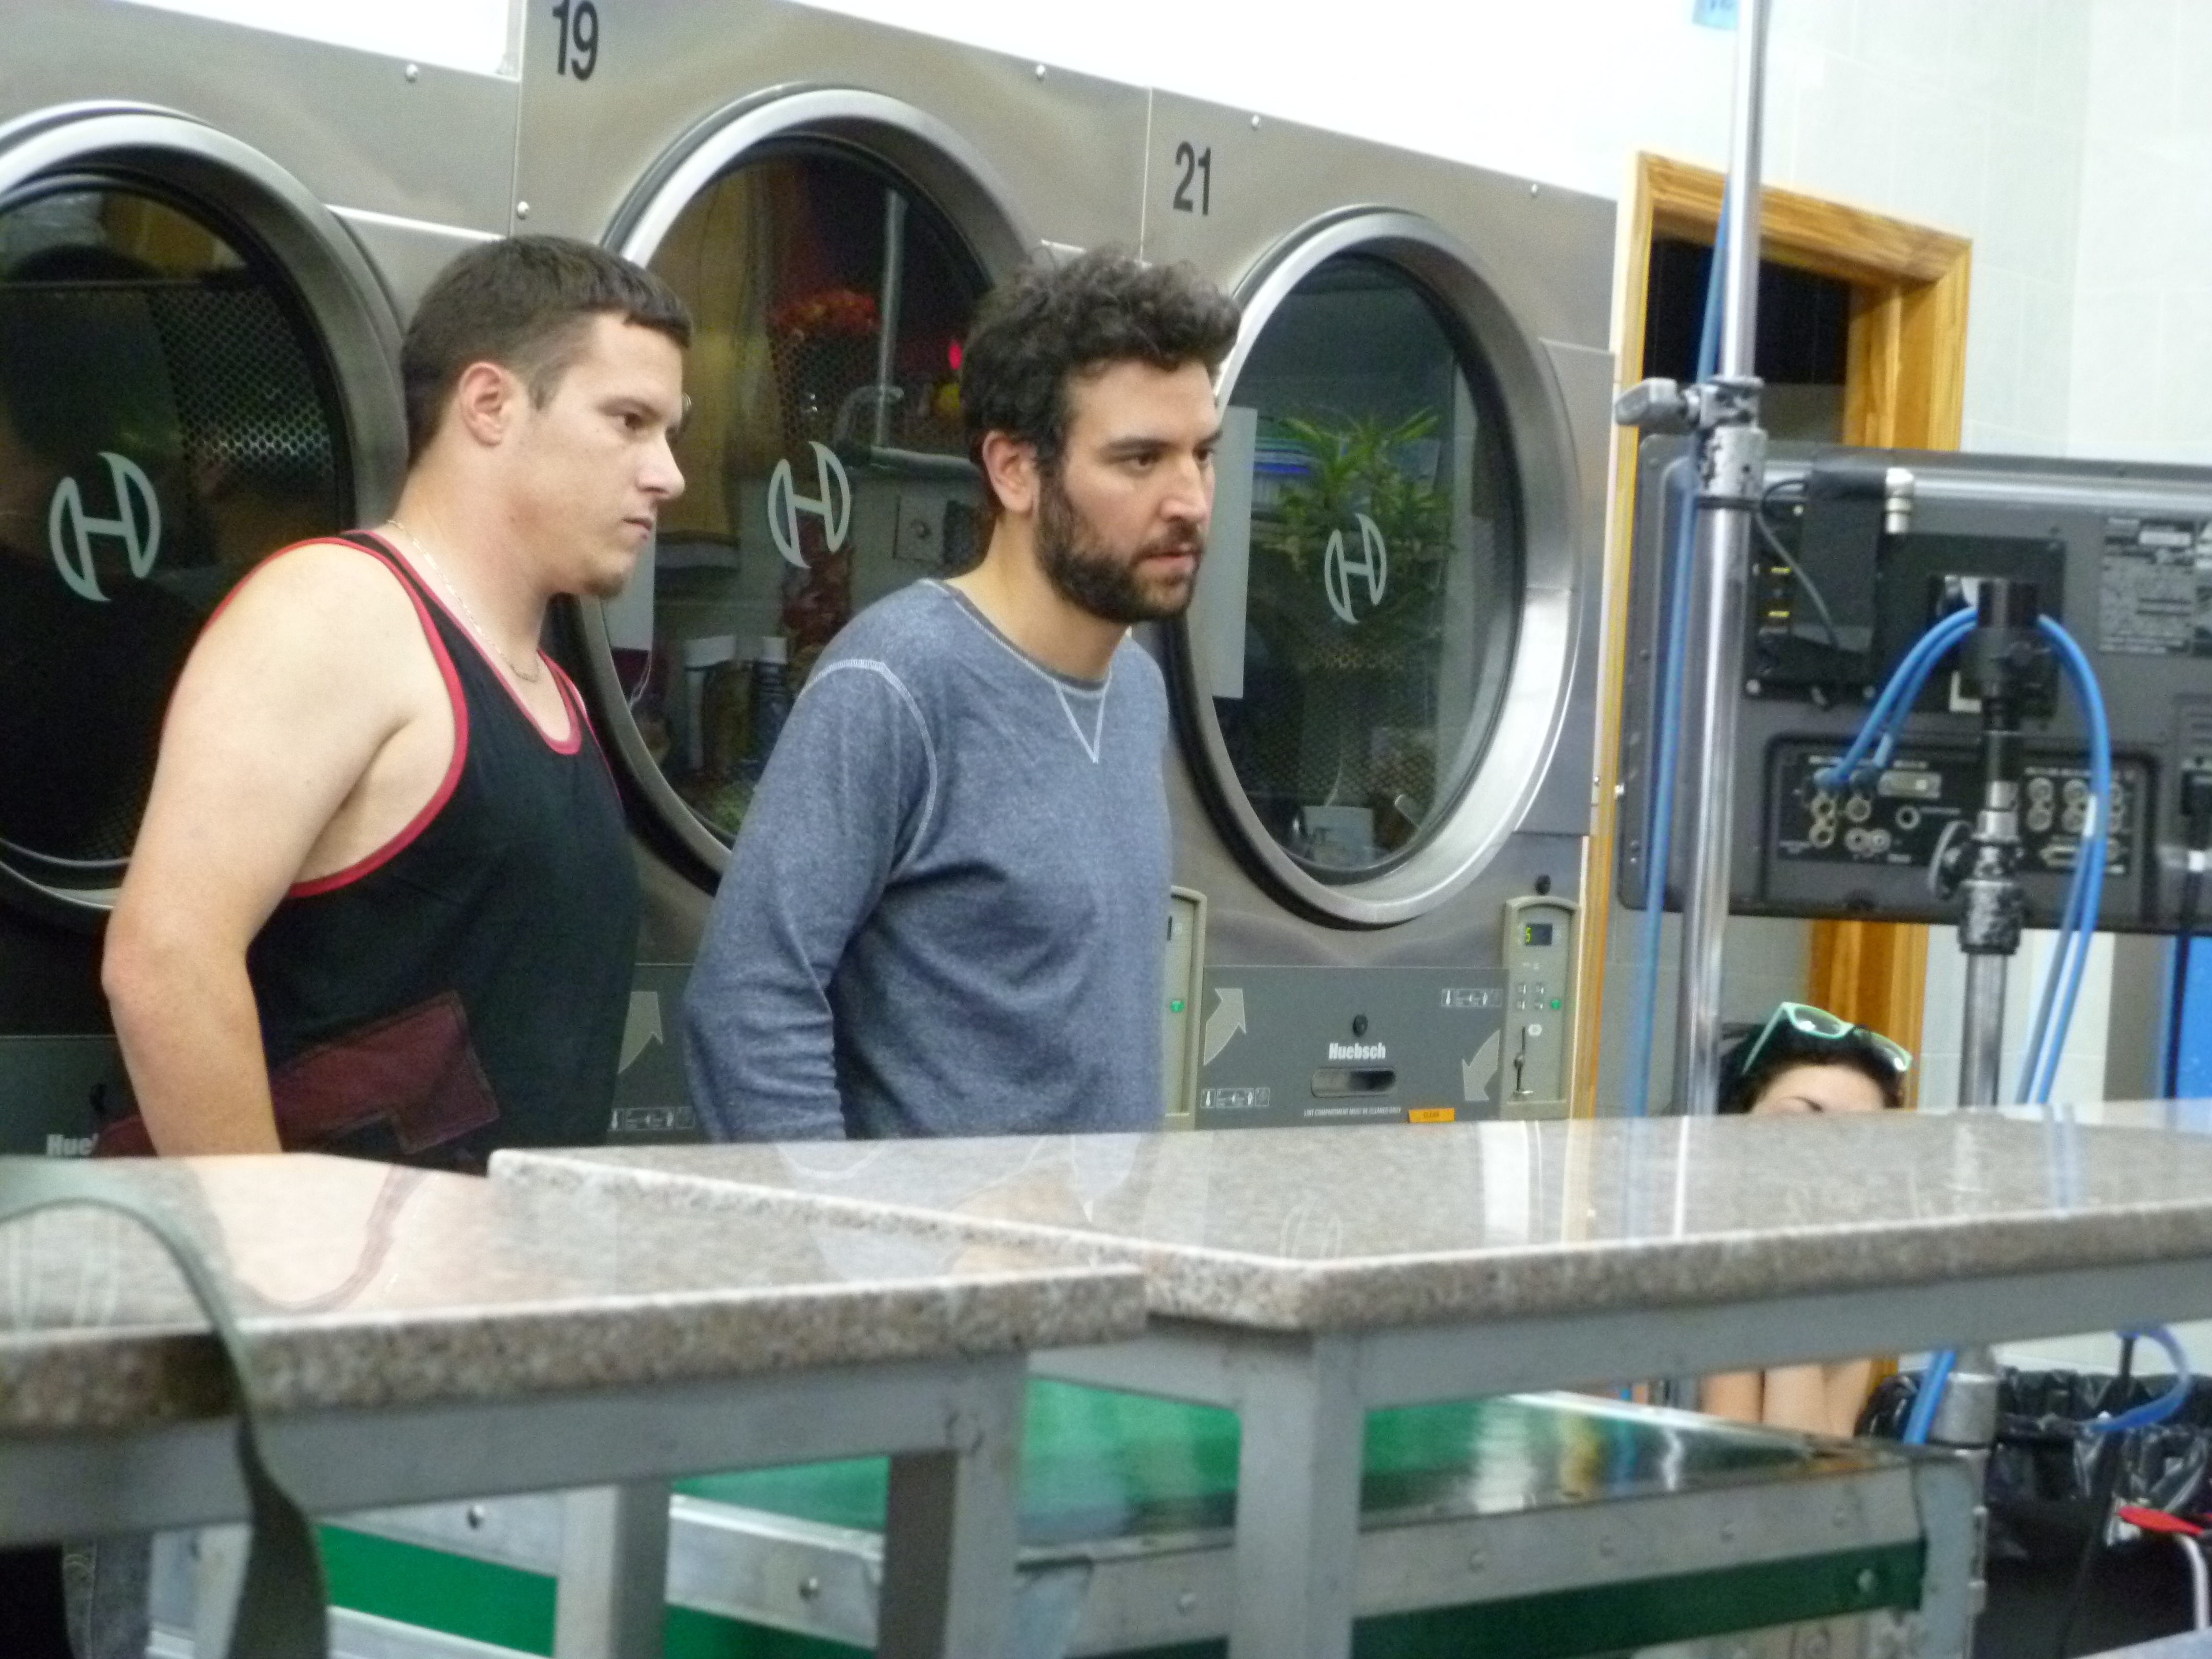 Actor Travis A McAfee & Director Josh Radnor on set during filming of Liberal Arts. (2012)